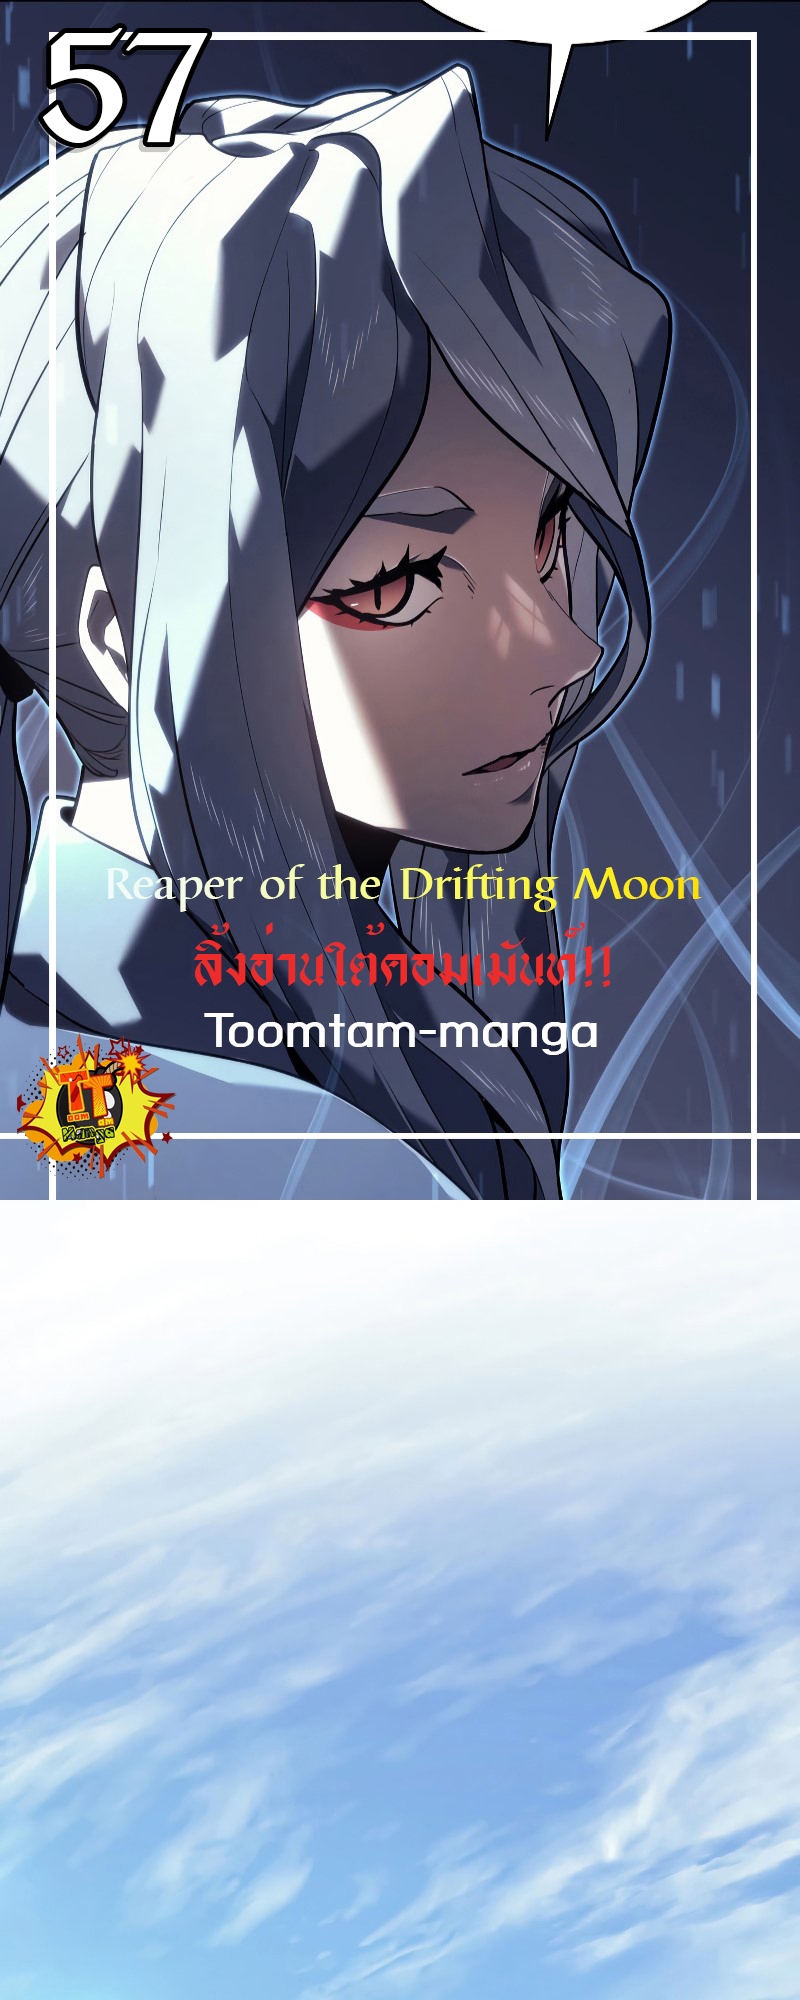 Reaper of the Drifting Moon 57 12 10 660001